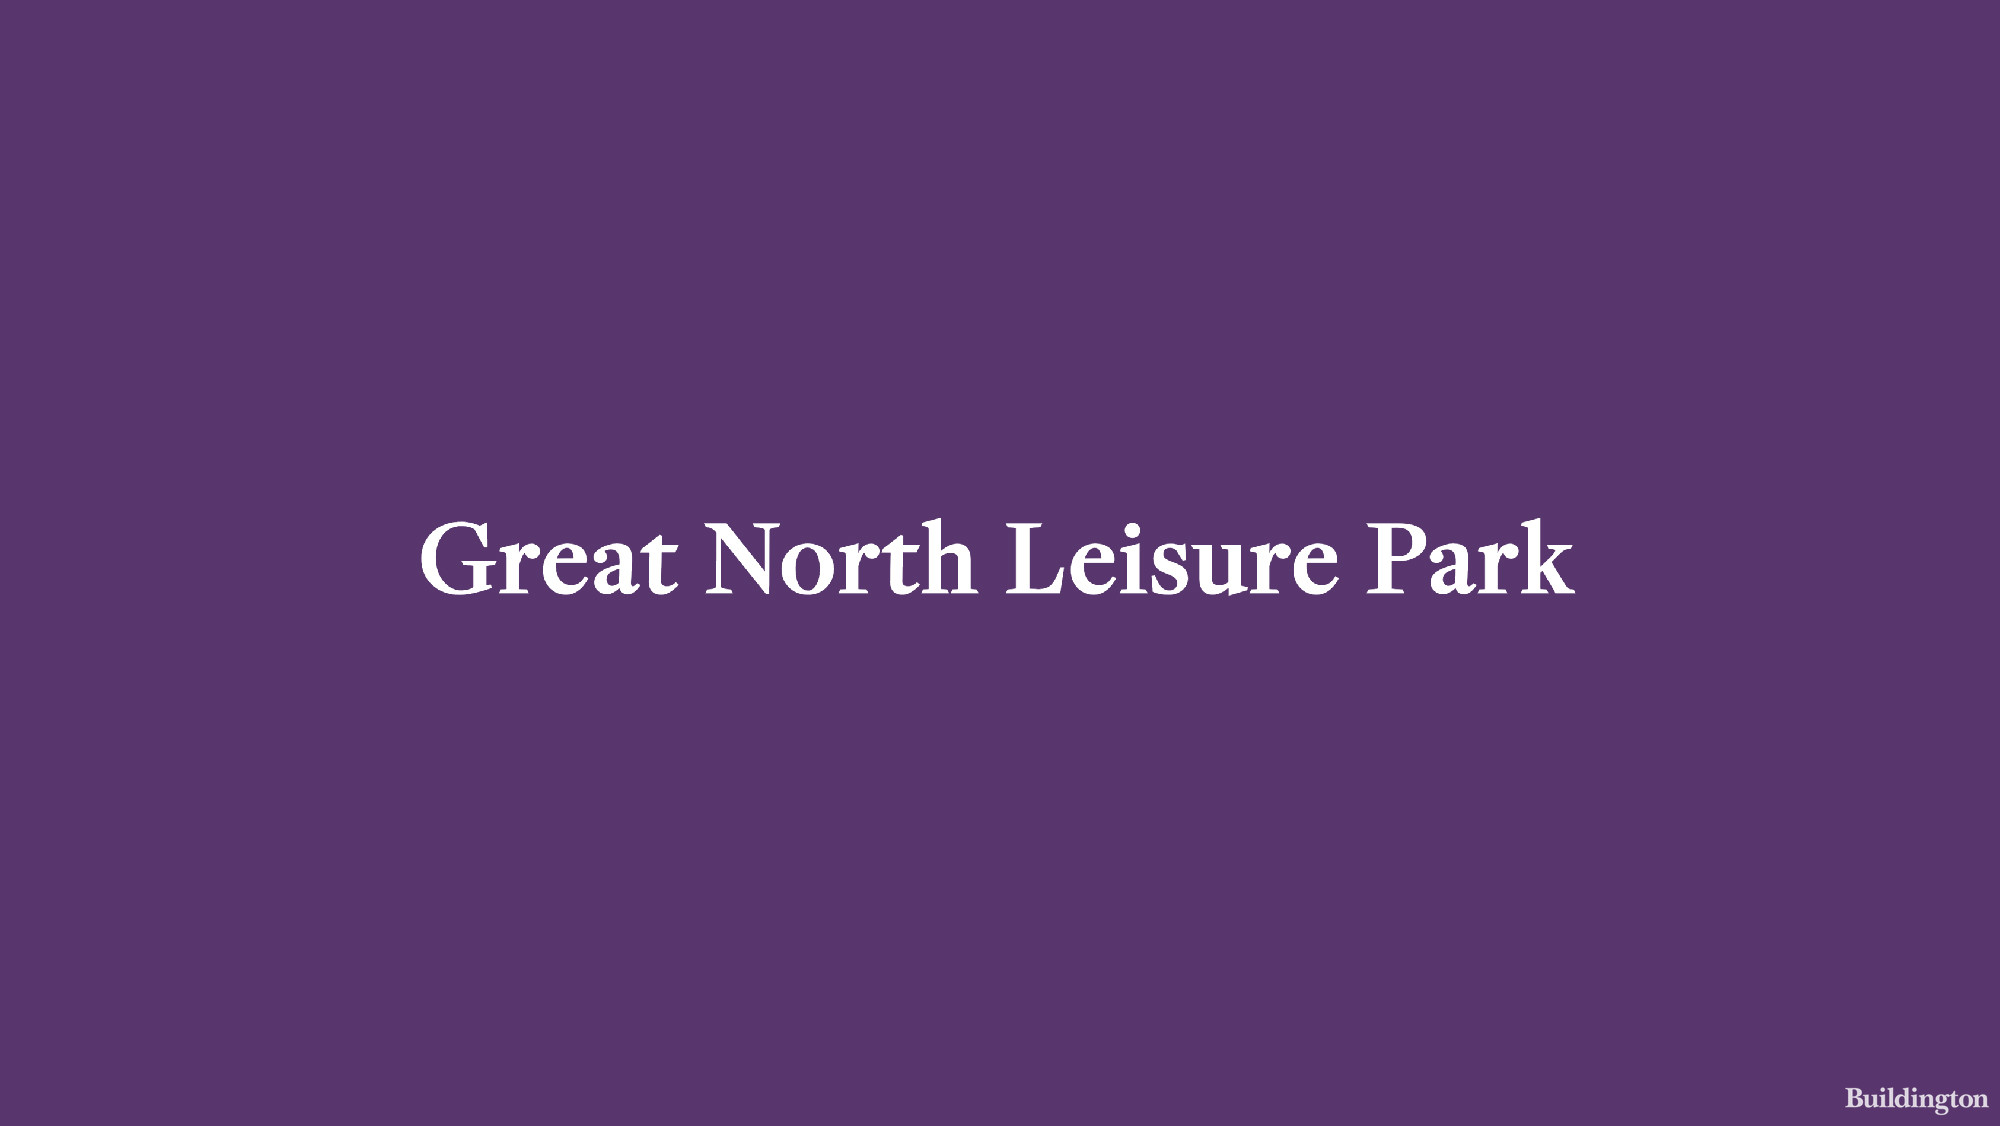 Great North Leisure Park by Regal London